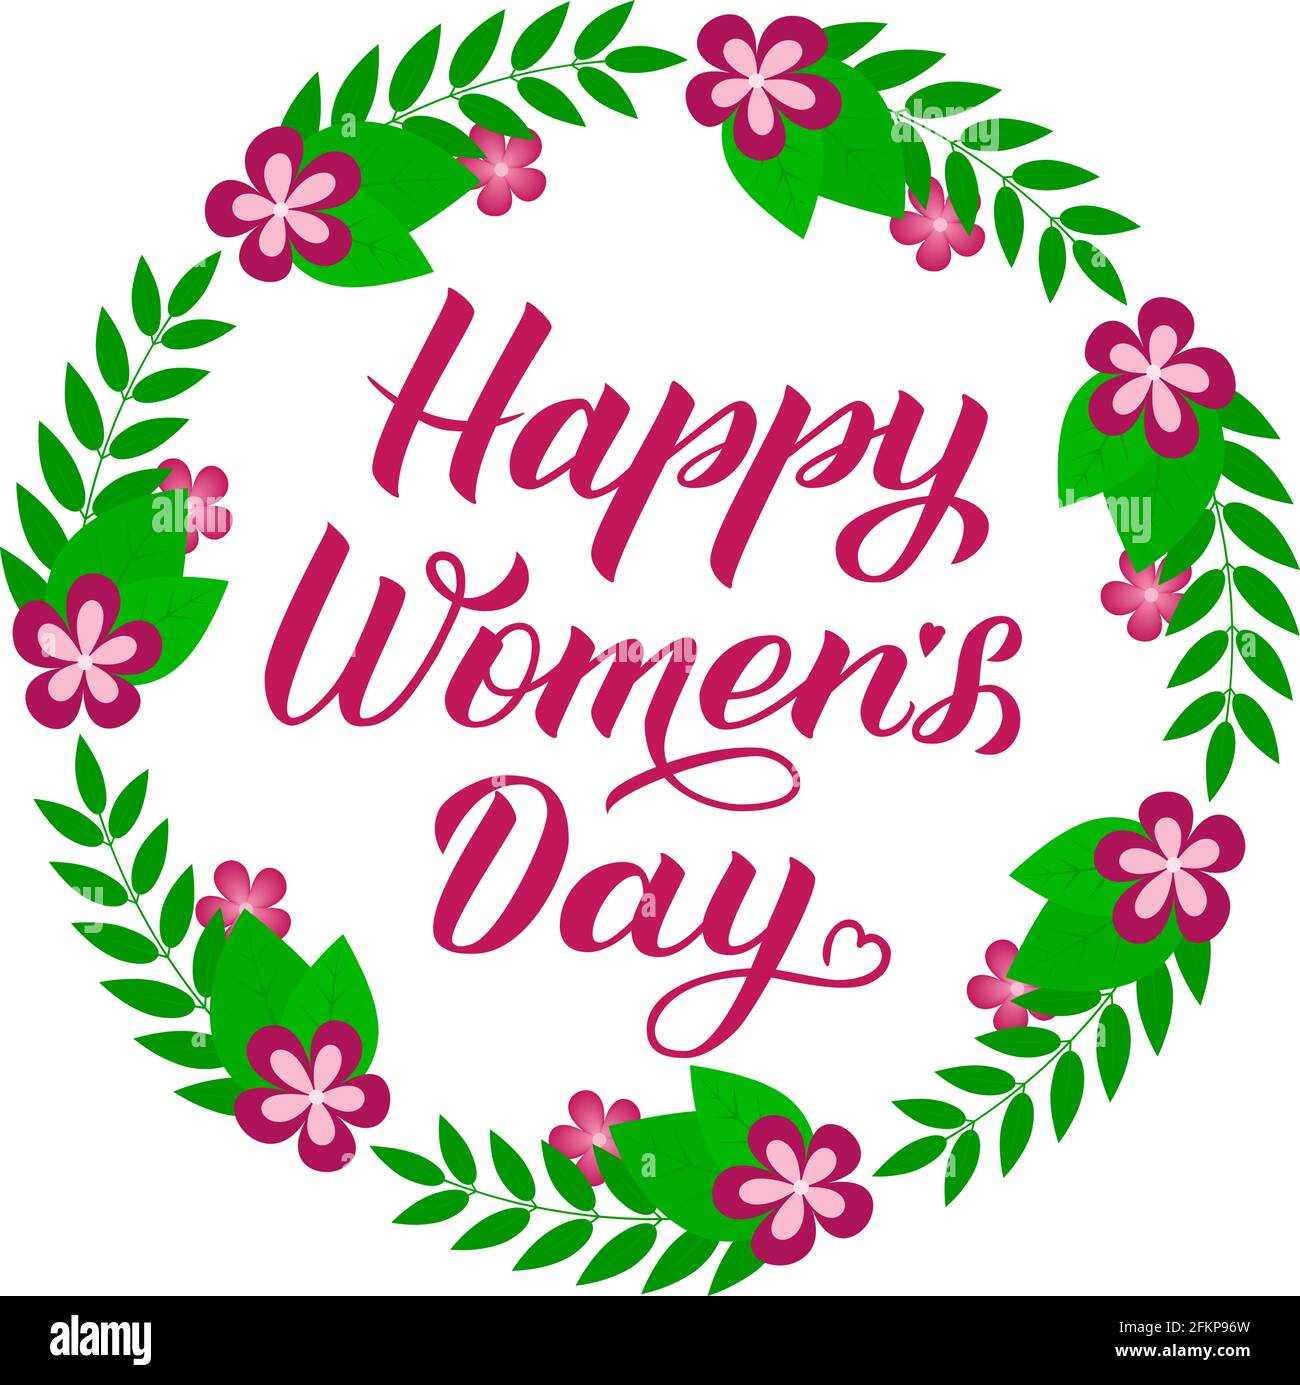 Happy Women s Day calligraphy lettering. Wreath of leaves ...